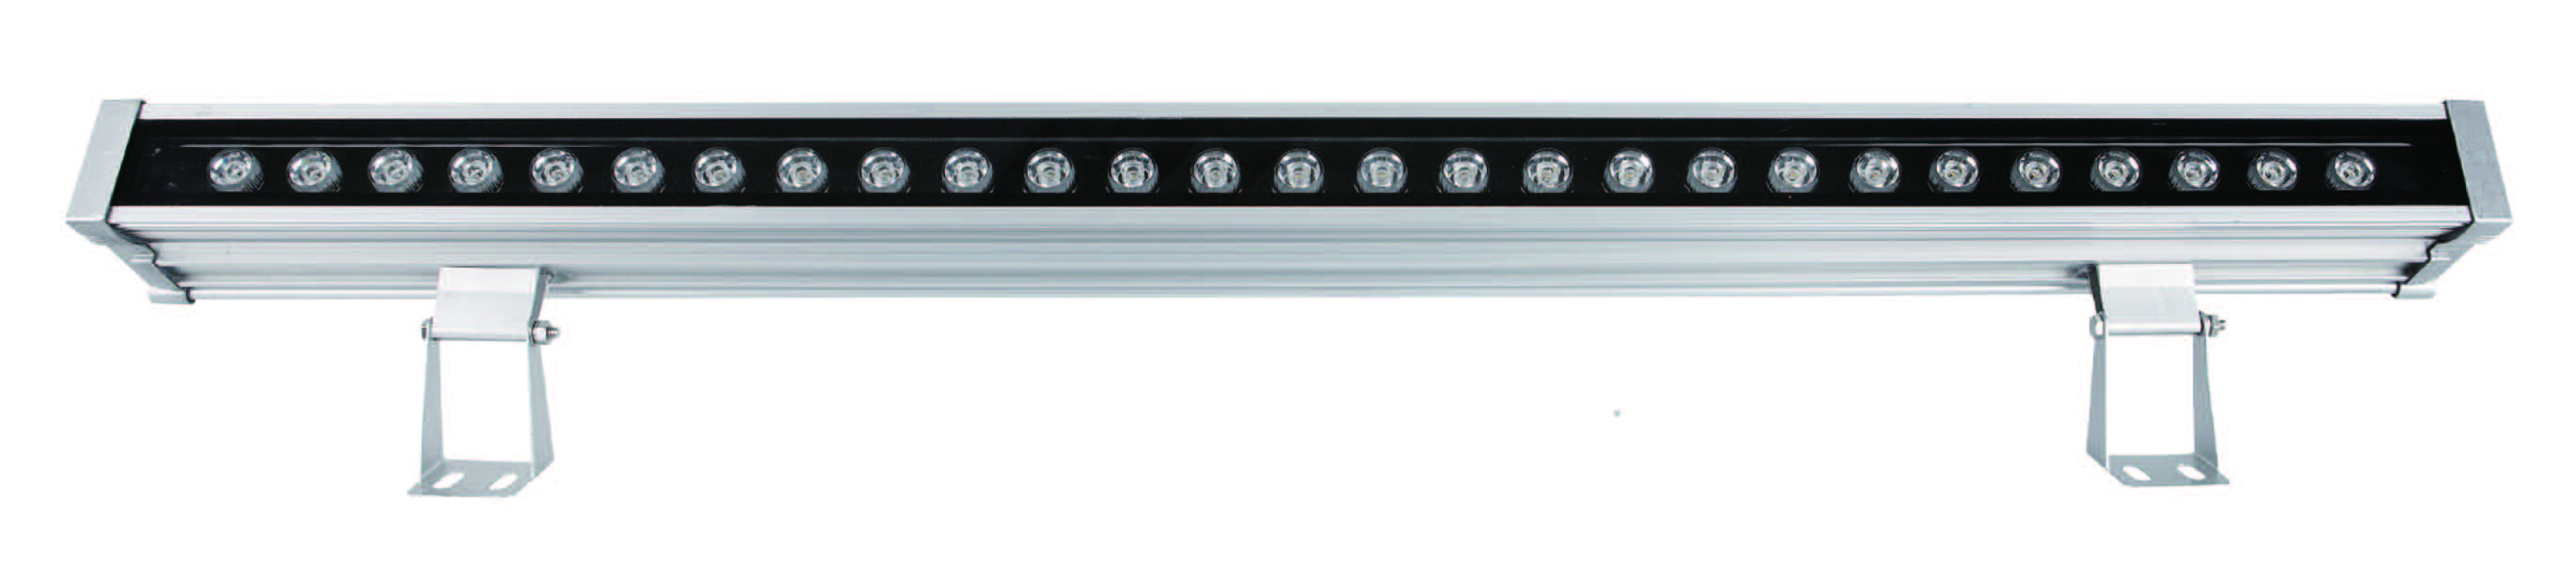 LED Wall Washer - copy